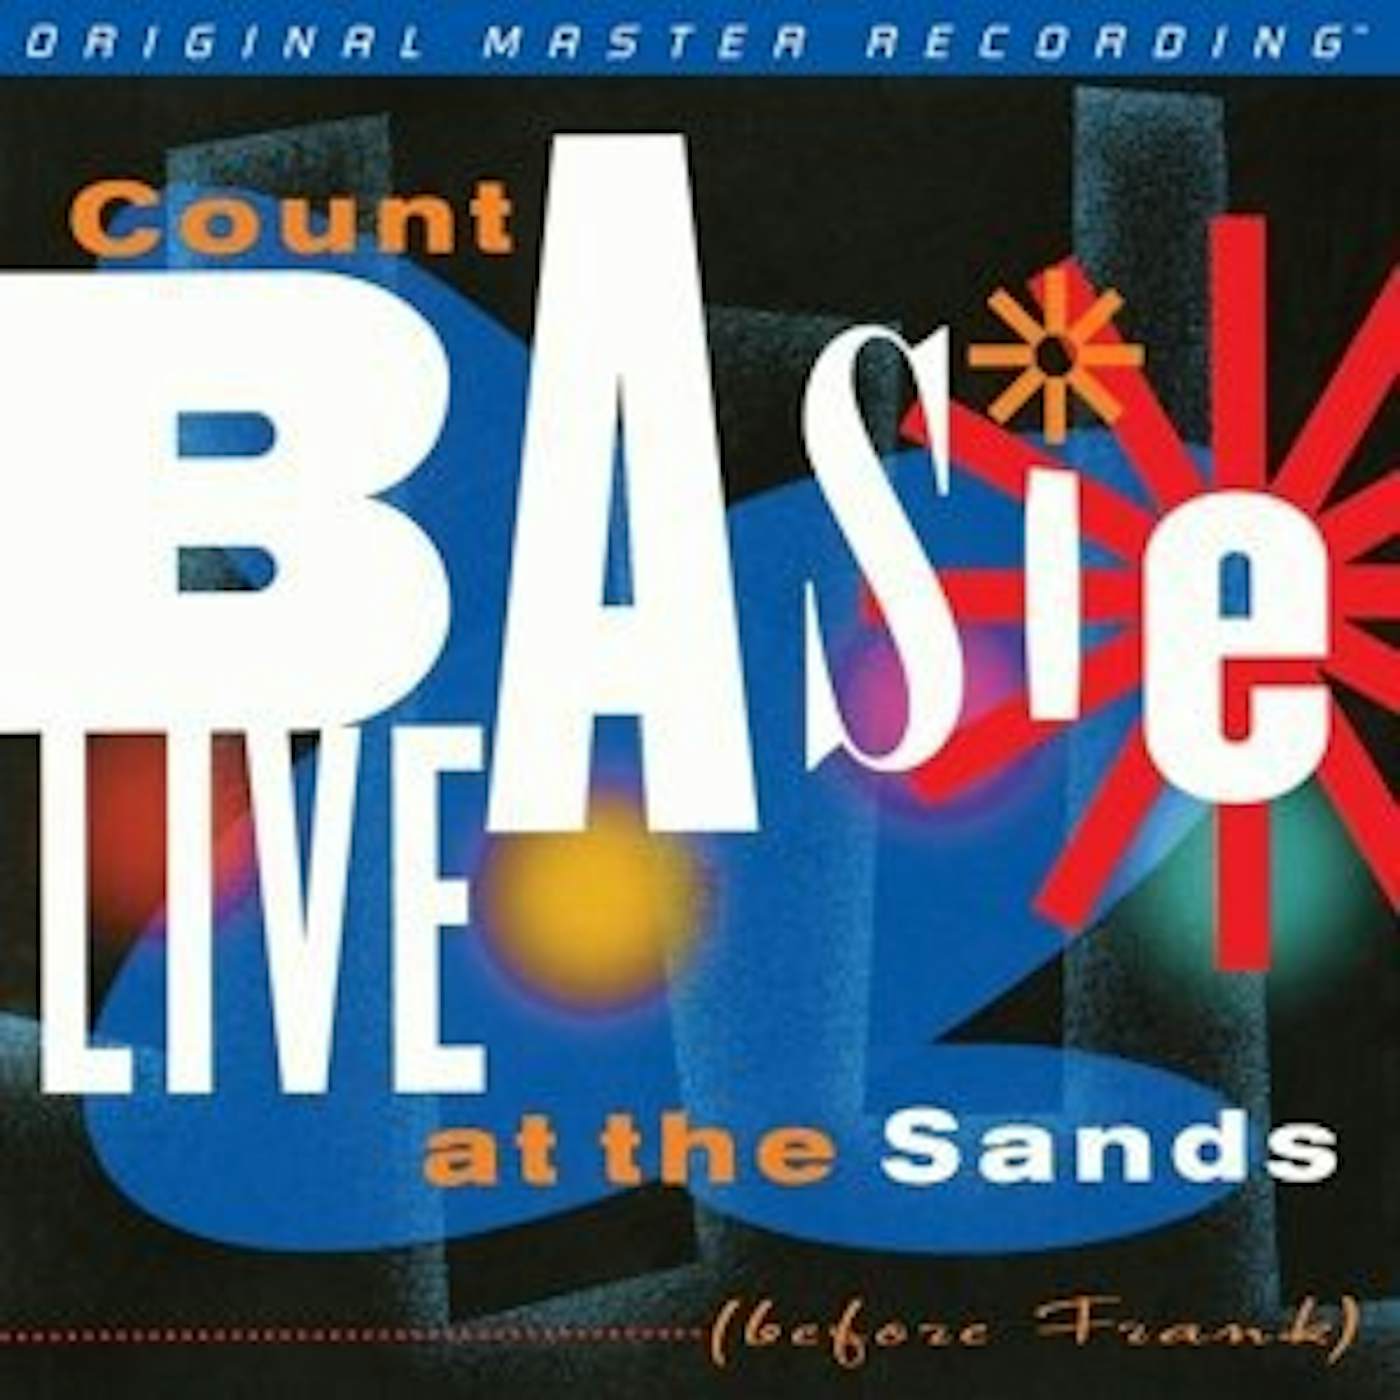 Count Basie LIVE AT THE SANDS Vinyl Record